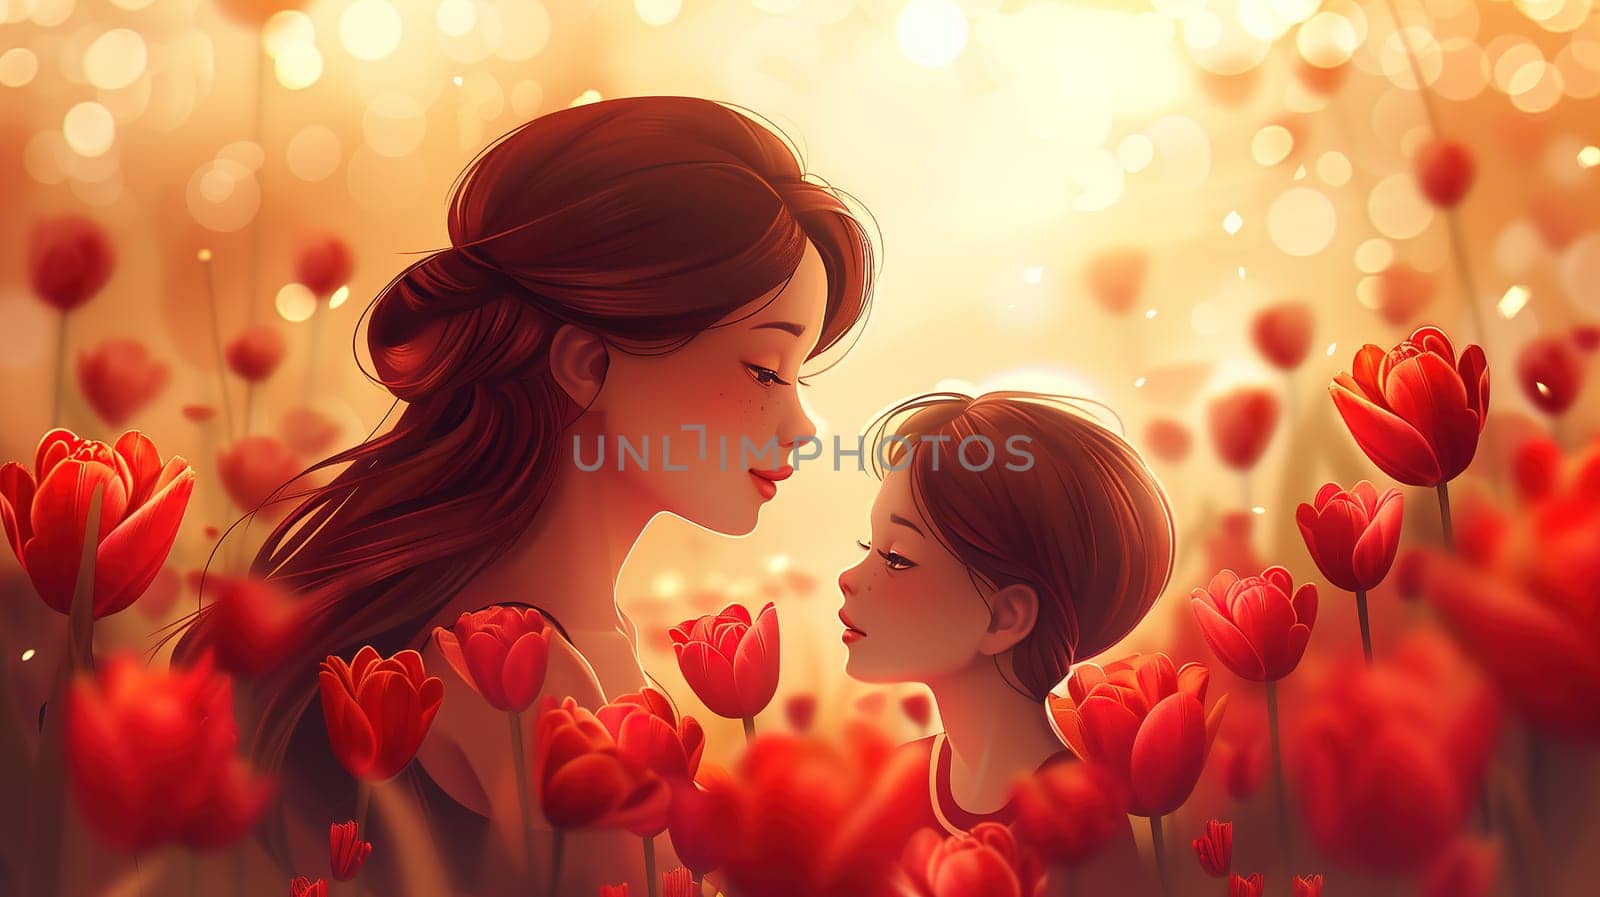 Woman and Child Standing in Field of Flowers by TRMK